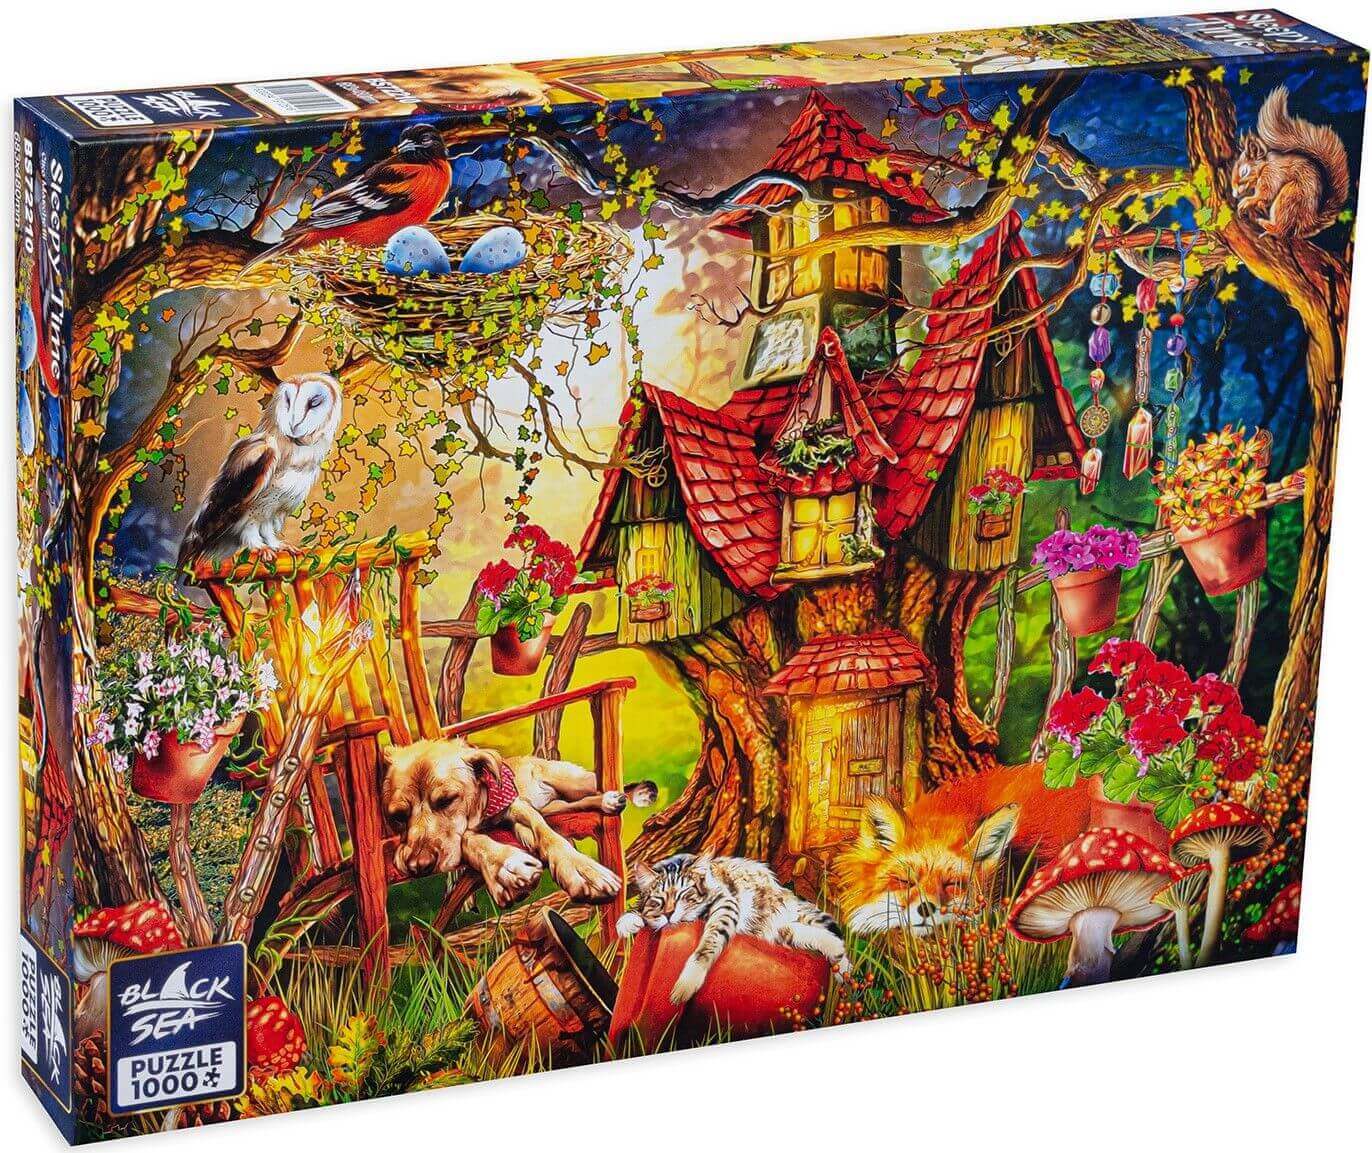 Puzzle Black Sea Premium 1000 pieces - Sleepy Time, A light breeze creeps into the quiet forest. The animals sleep deeply and are huddled in the coziness of nature. The scent of wildflowers is carried around and the song of the birds is no longer heard so